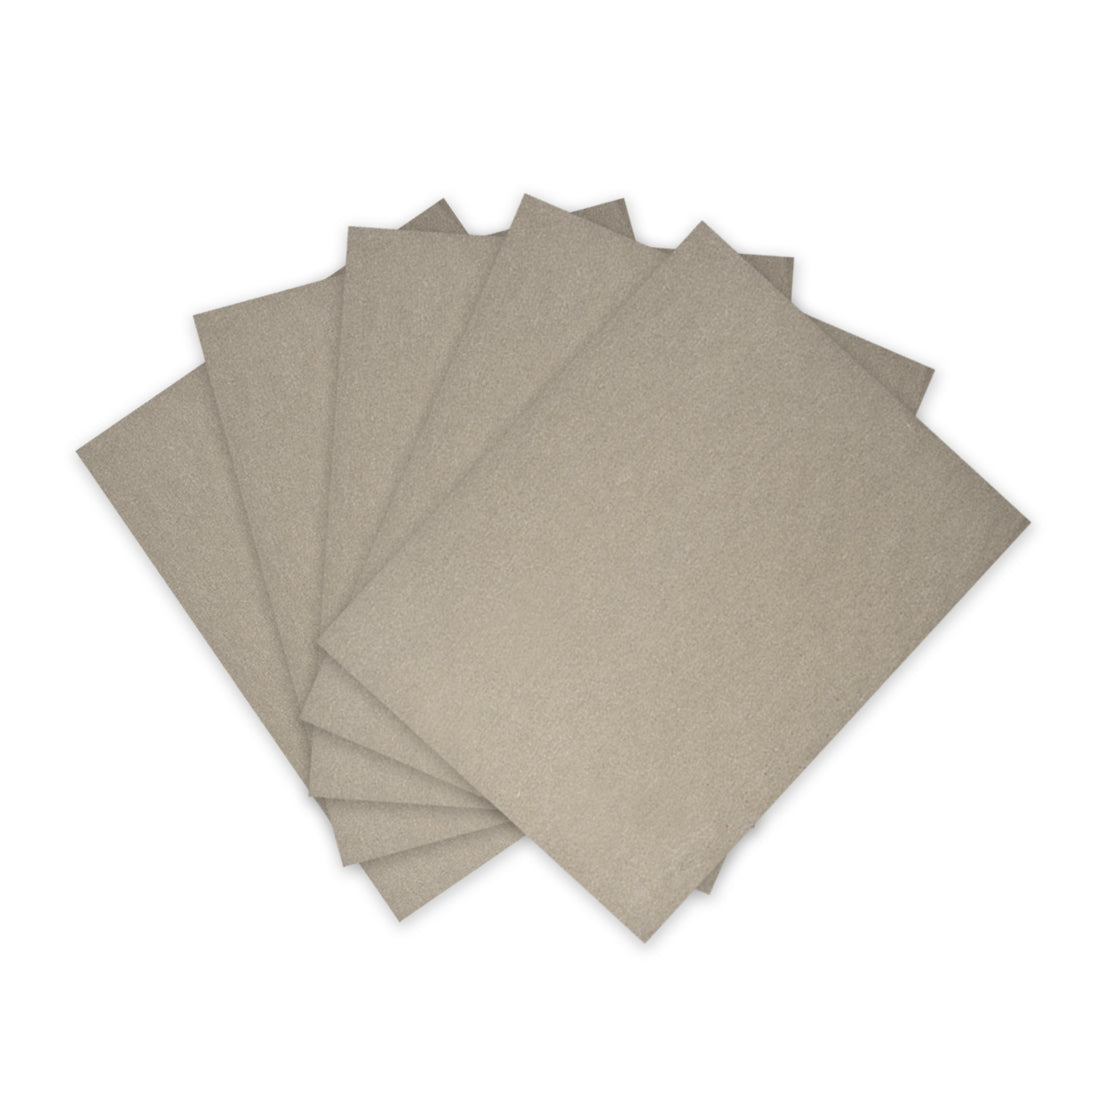 Uxcell Uxcell 5pcs 7000 Grits Wet Dry Waterproof Sandpaper 9" x 11" Abrasive Paper Sheets